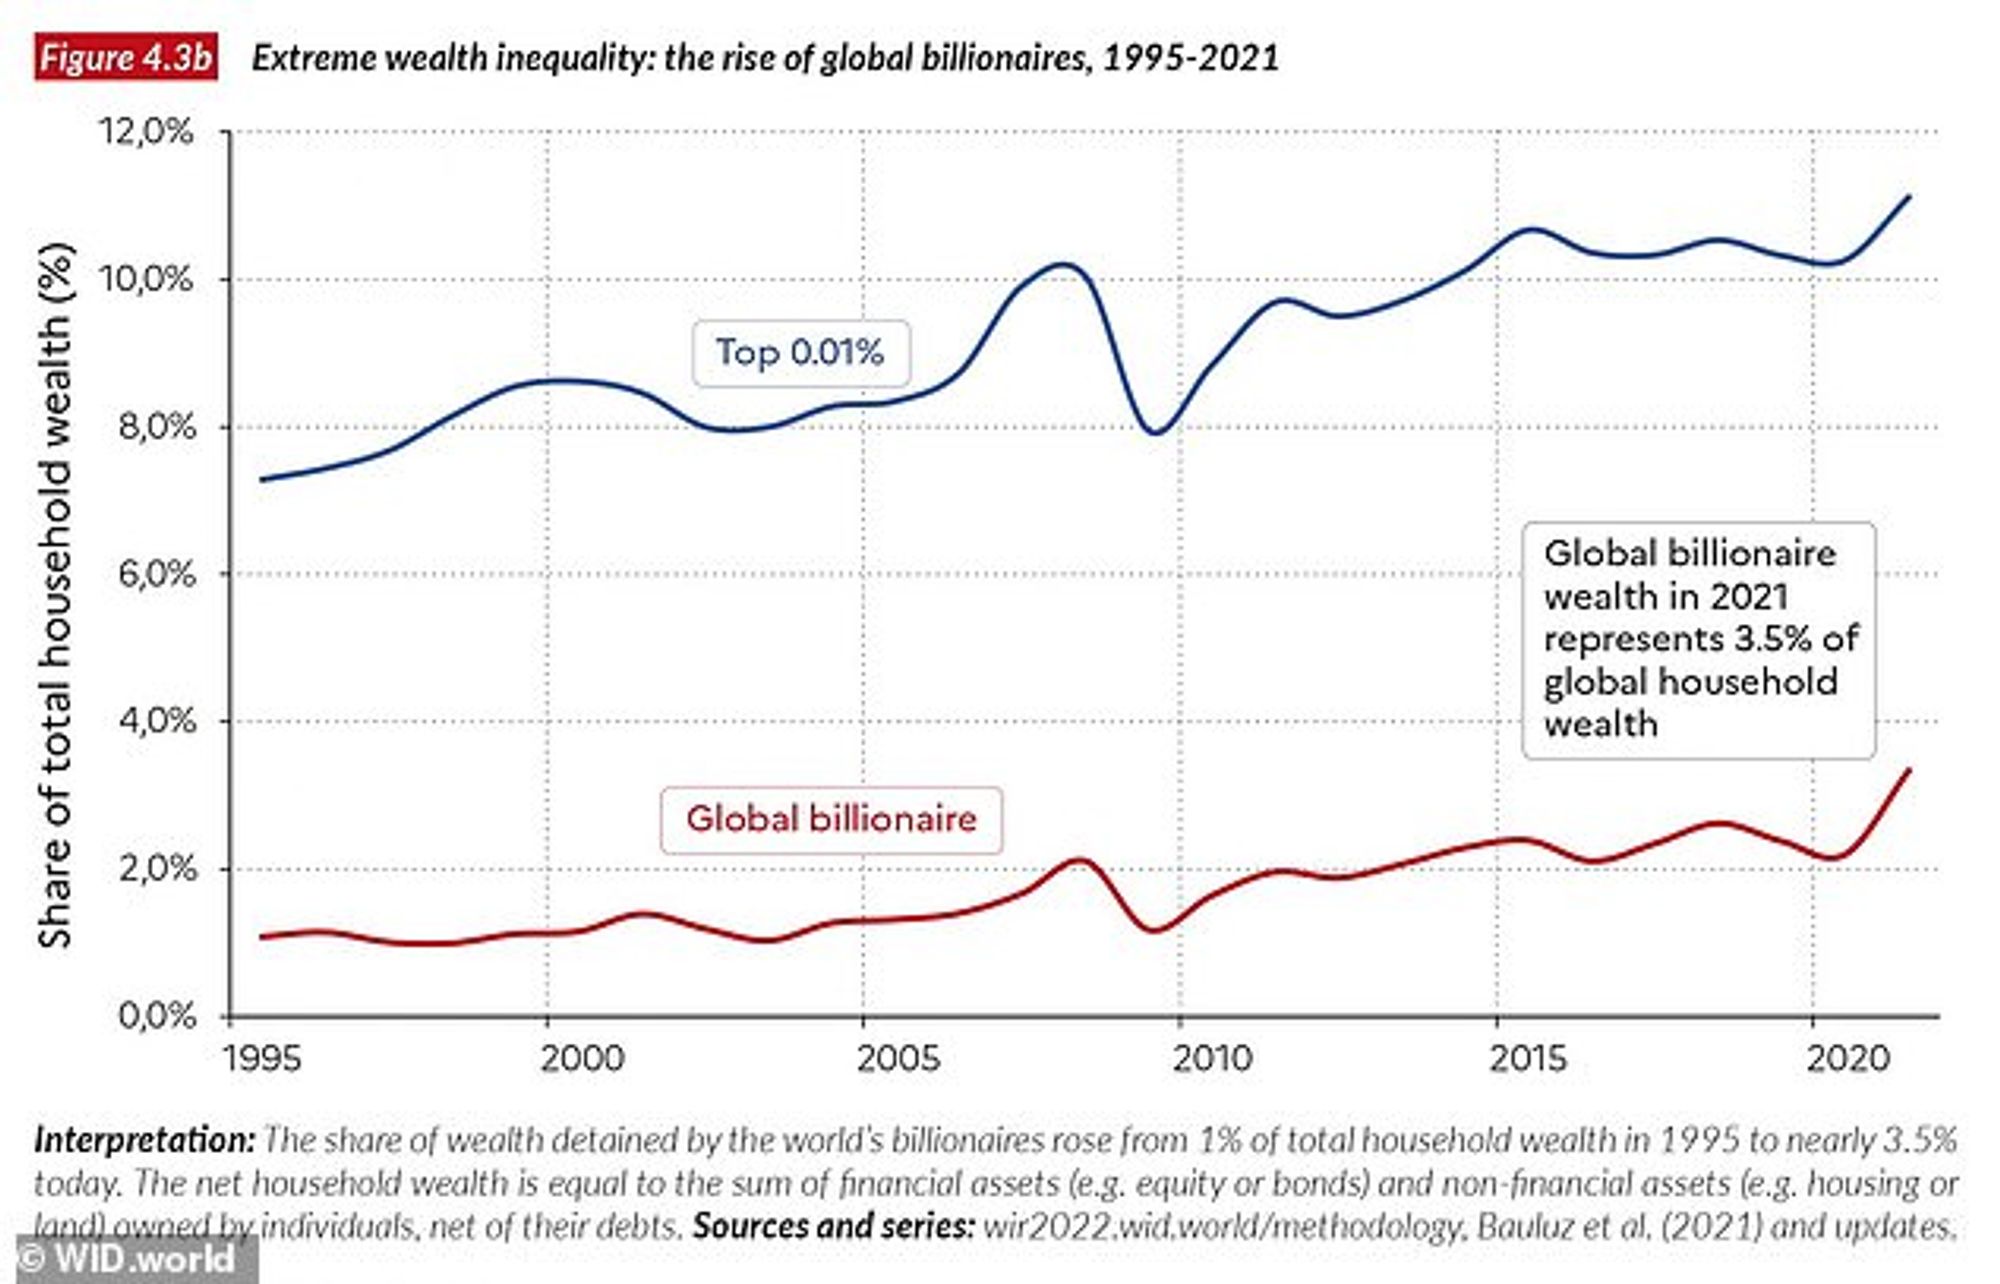 Top 0.01% of wealthy individuals now hold 11% of the world's wealth - up from 10% in 2020  | Daily Mail Online